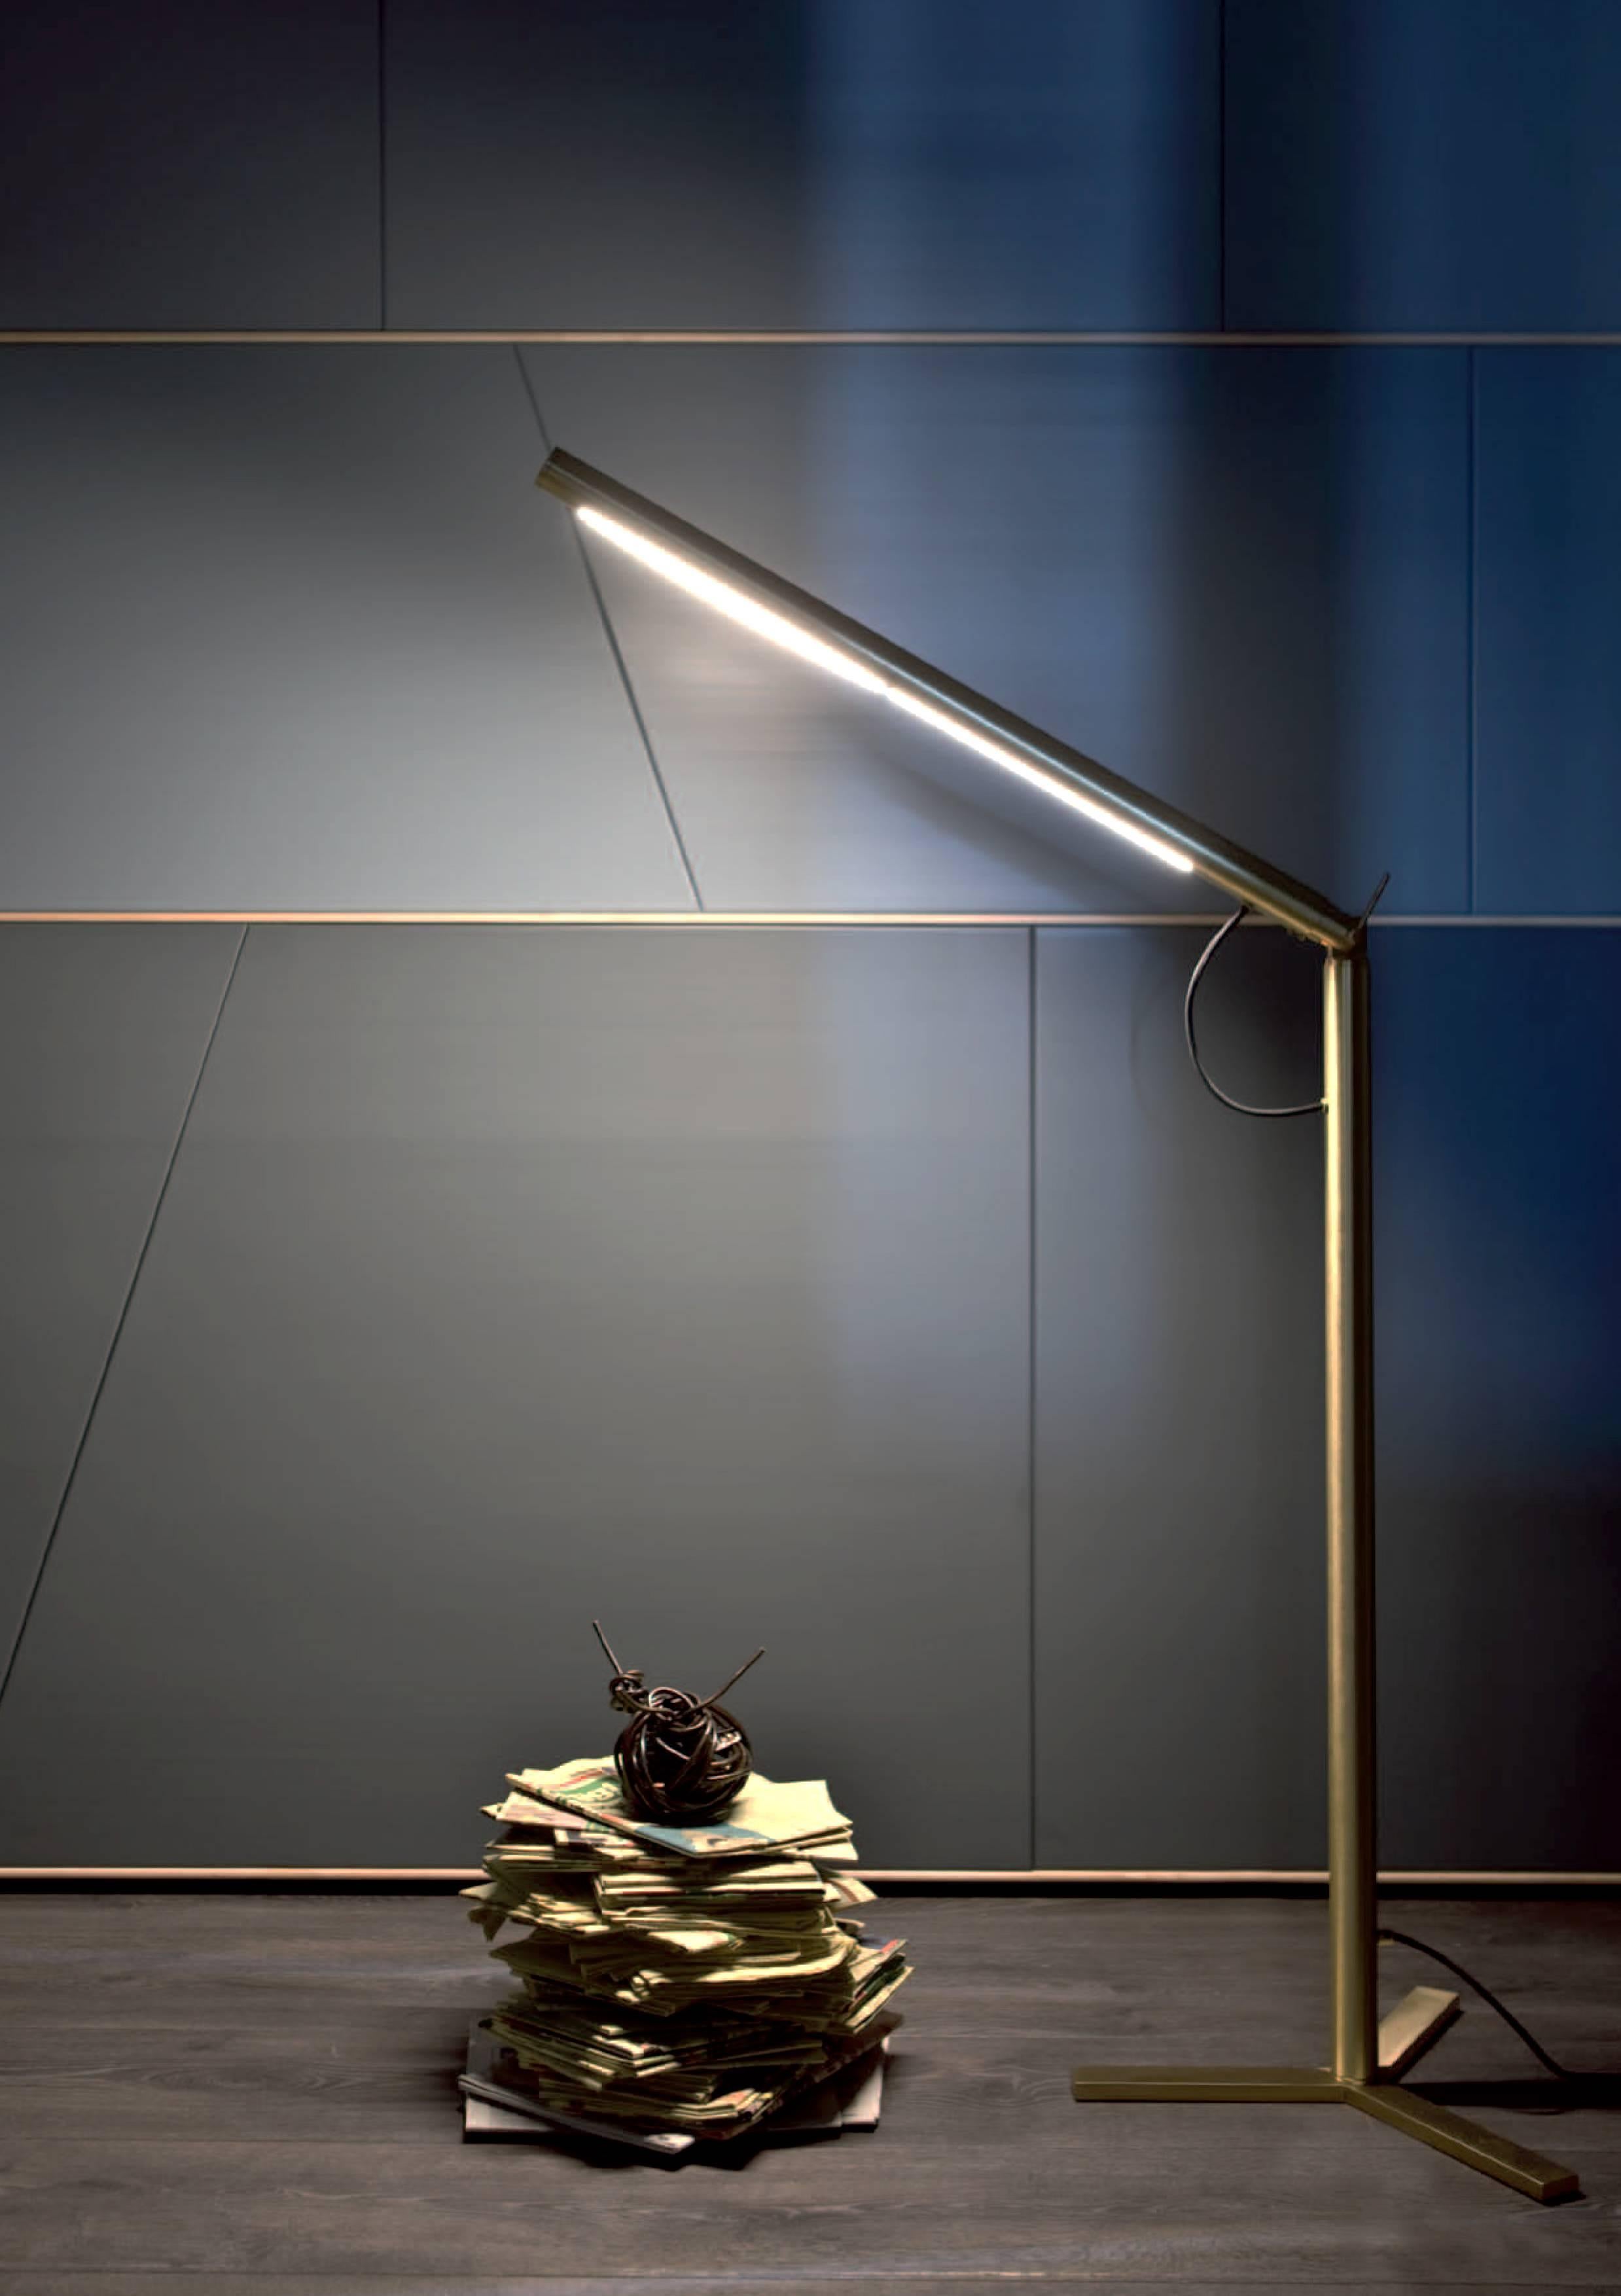 Level is both a sculptural and practical and flexible floor lamp. Artefatto designed a purist cylinder in satin brass with LED light that allows users to adapt it to their particular requirements.
The level lamp brass cylinder can be inclined from